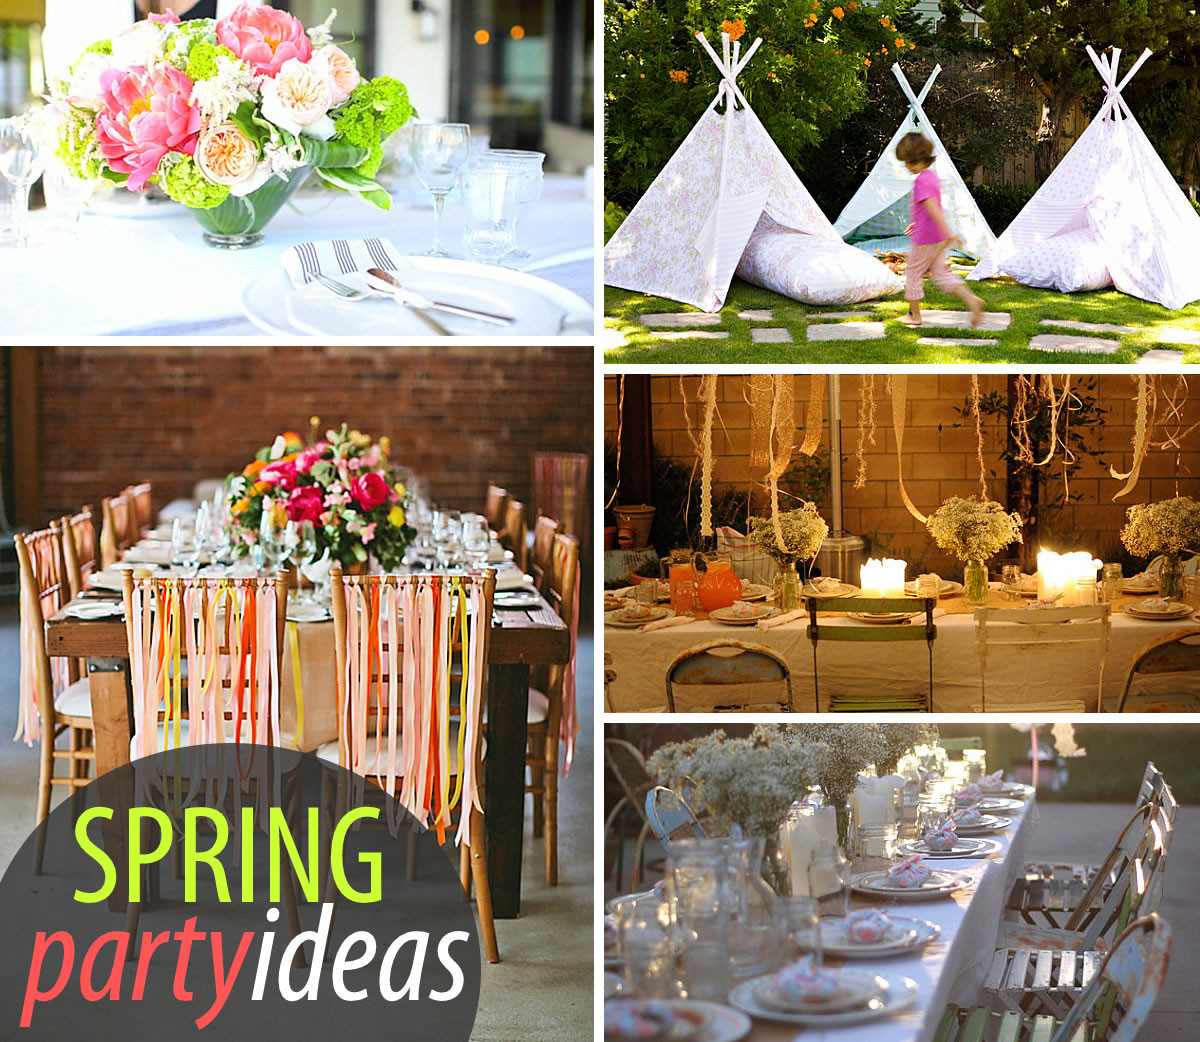 Spring Birthday Party Ideas
 20 Colorful Spring Party Ideas